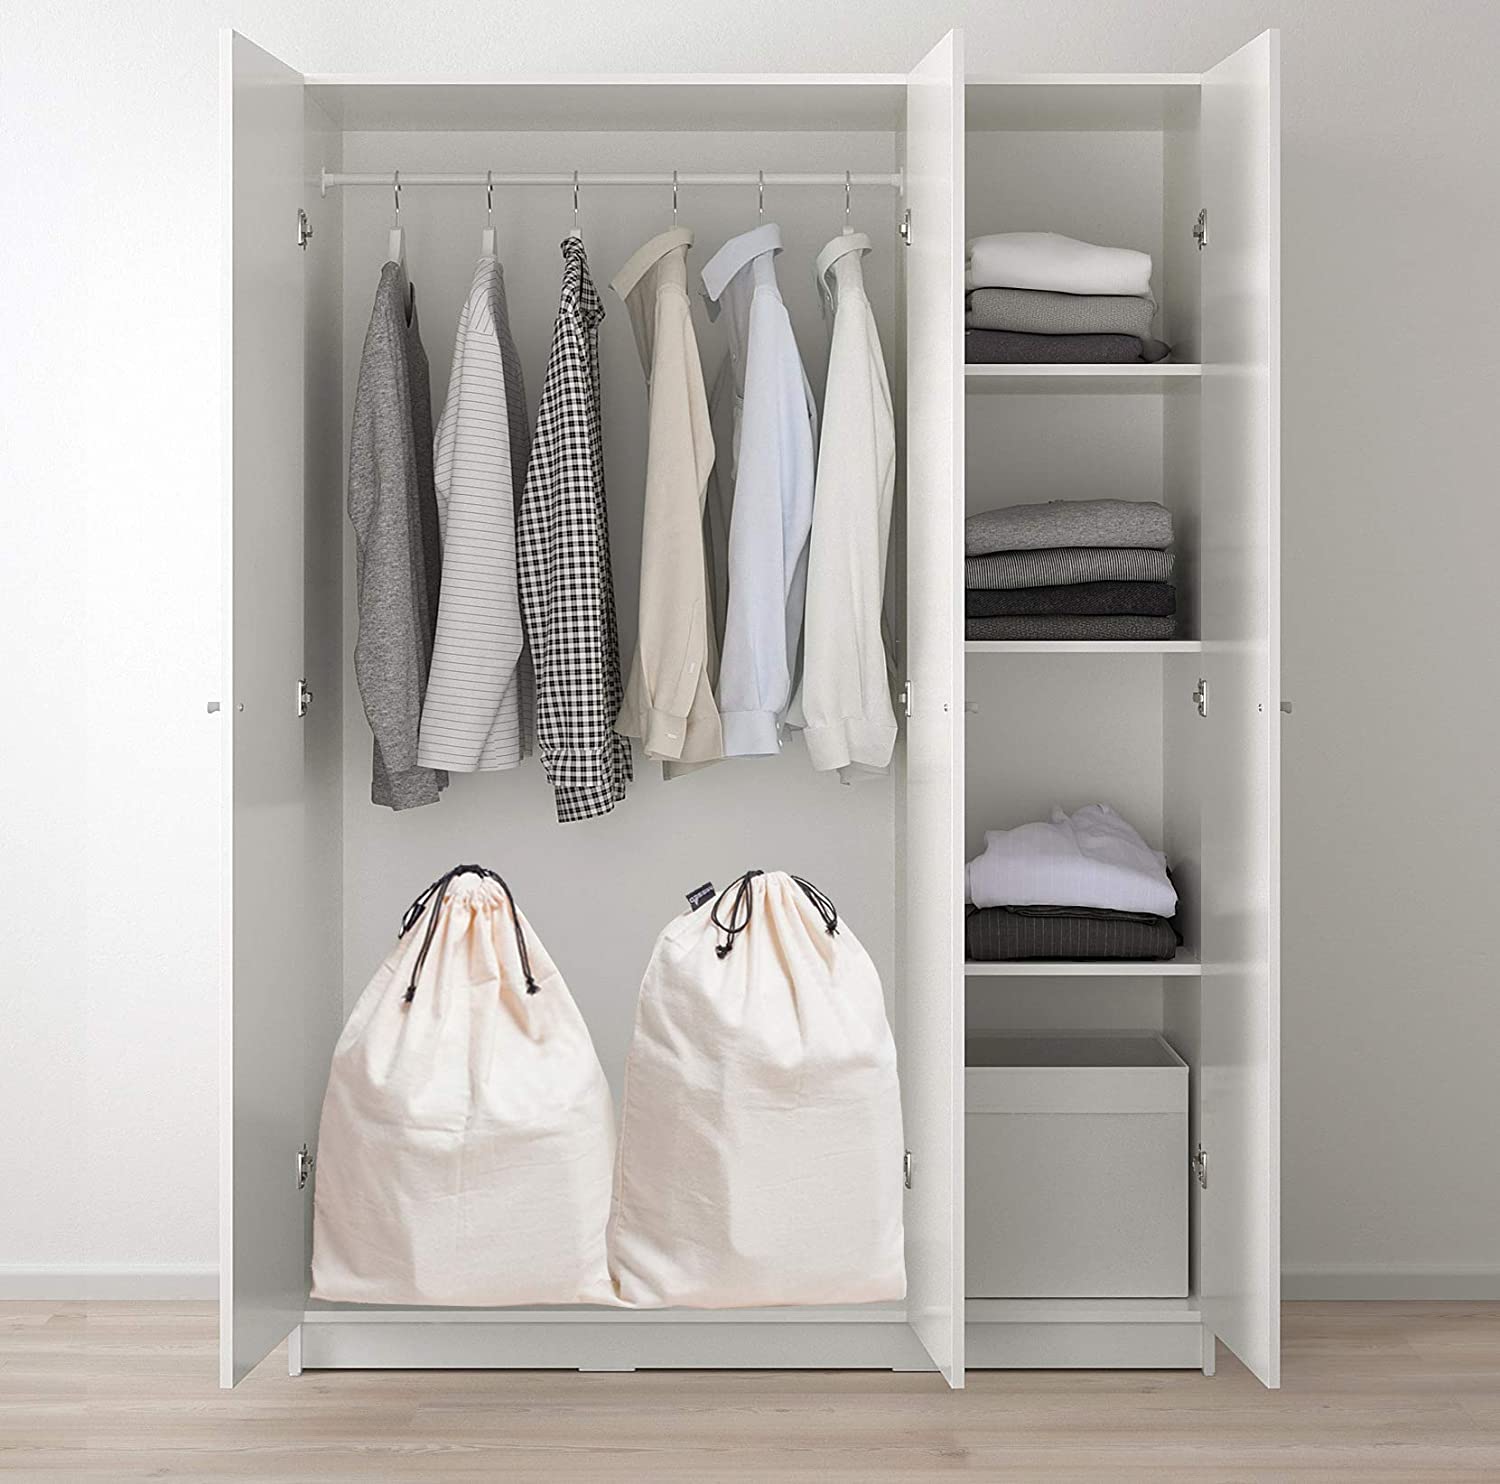  MISSLO Cotton Breathable Dust-Proof Drawstring Storage